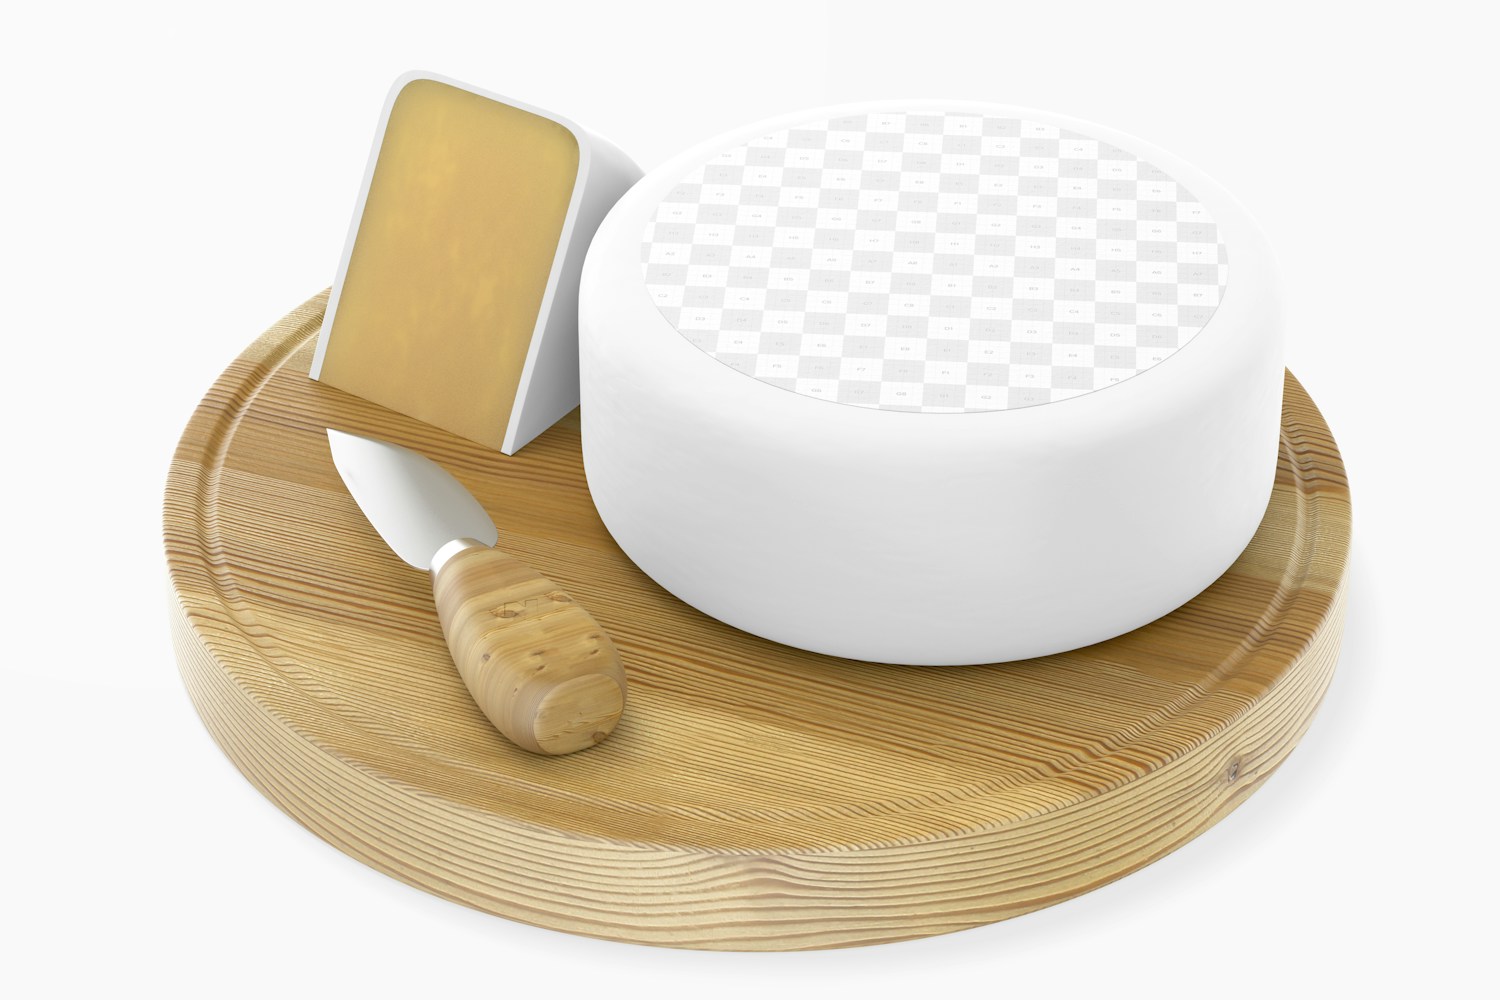 Round Cheese Mockup, Perspective